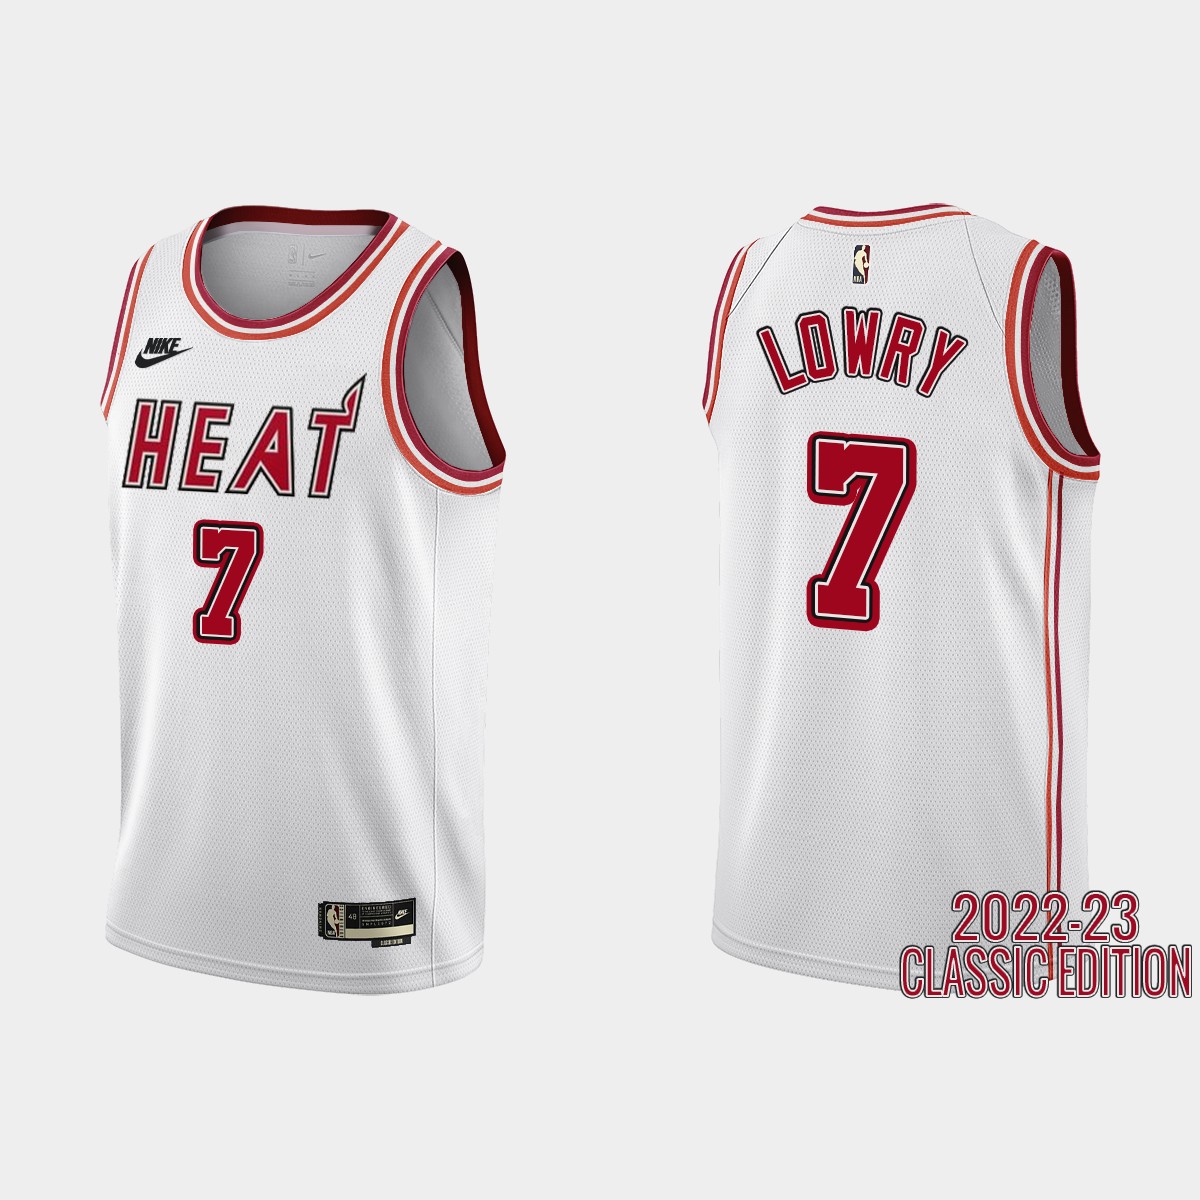 Kyle Lowry #7 Miami Heat 2022-23 White Classic Edition Jersey